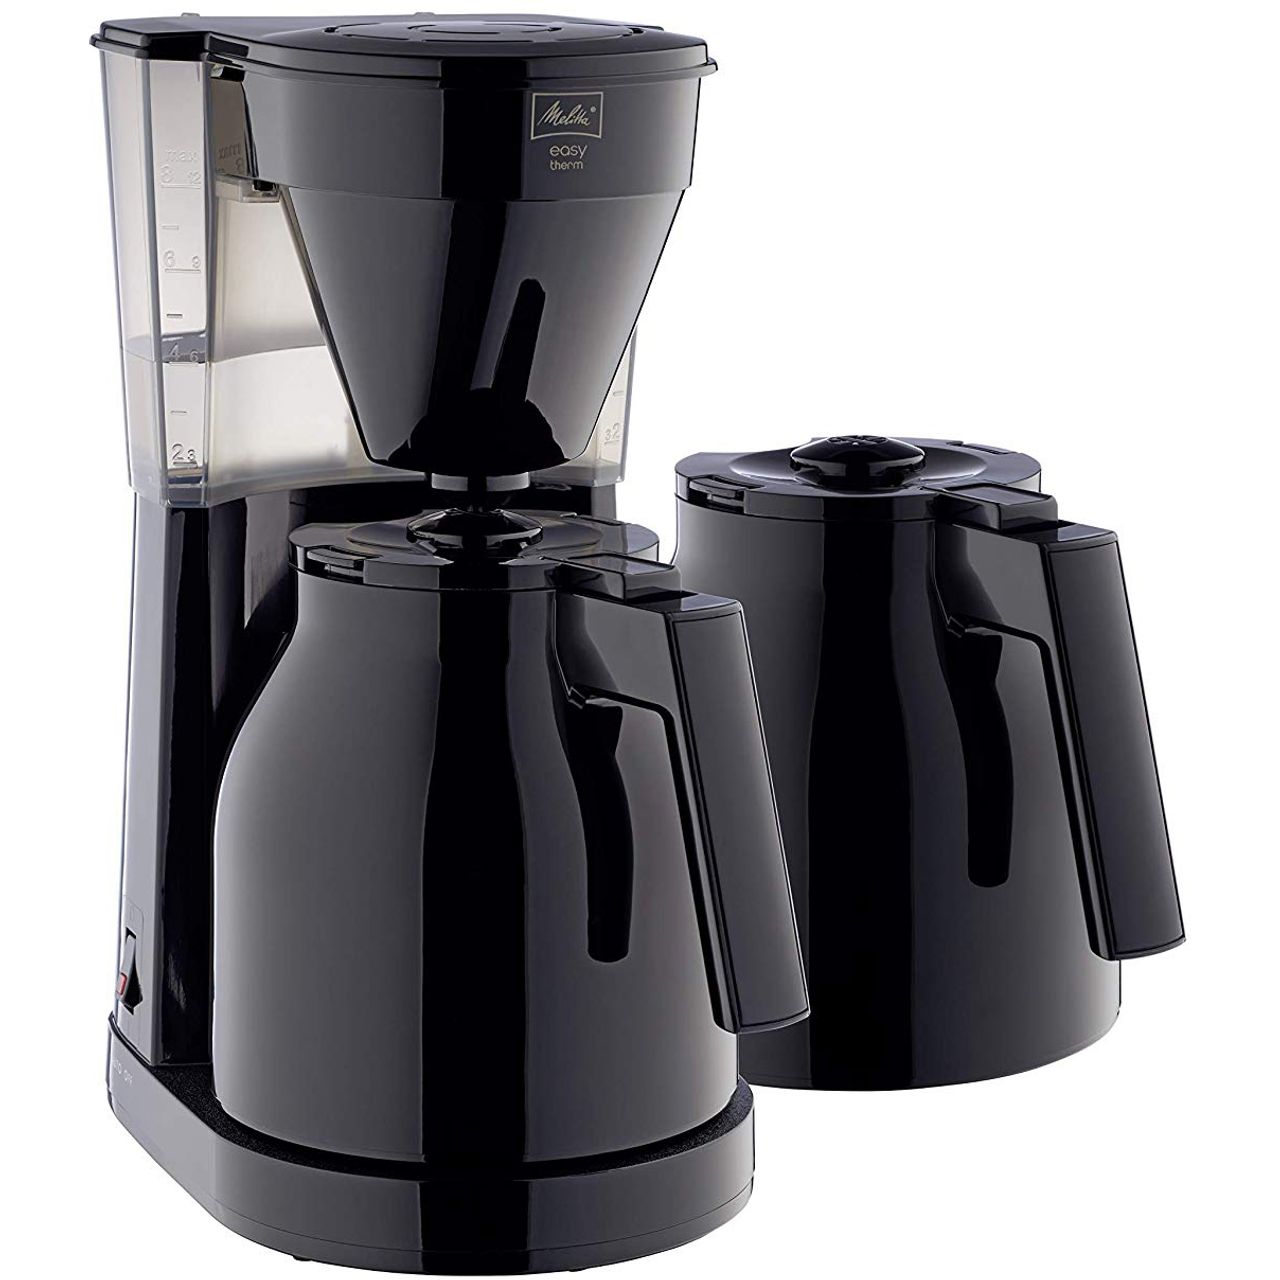 Melitta Easy Therm II 1023-06 6762893 Filter Coffee Machine Review